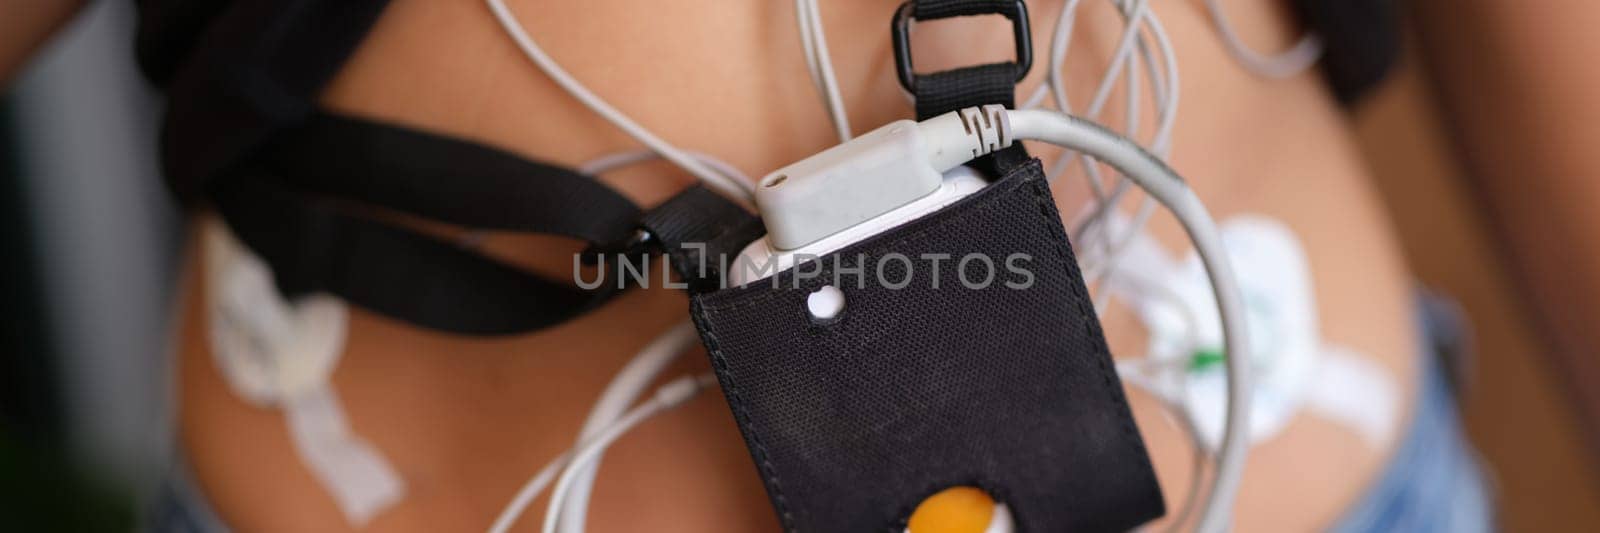 Ecg holter monitor hanging on patient body closeup by kuprevich